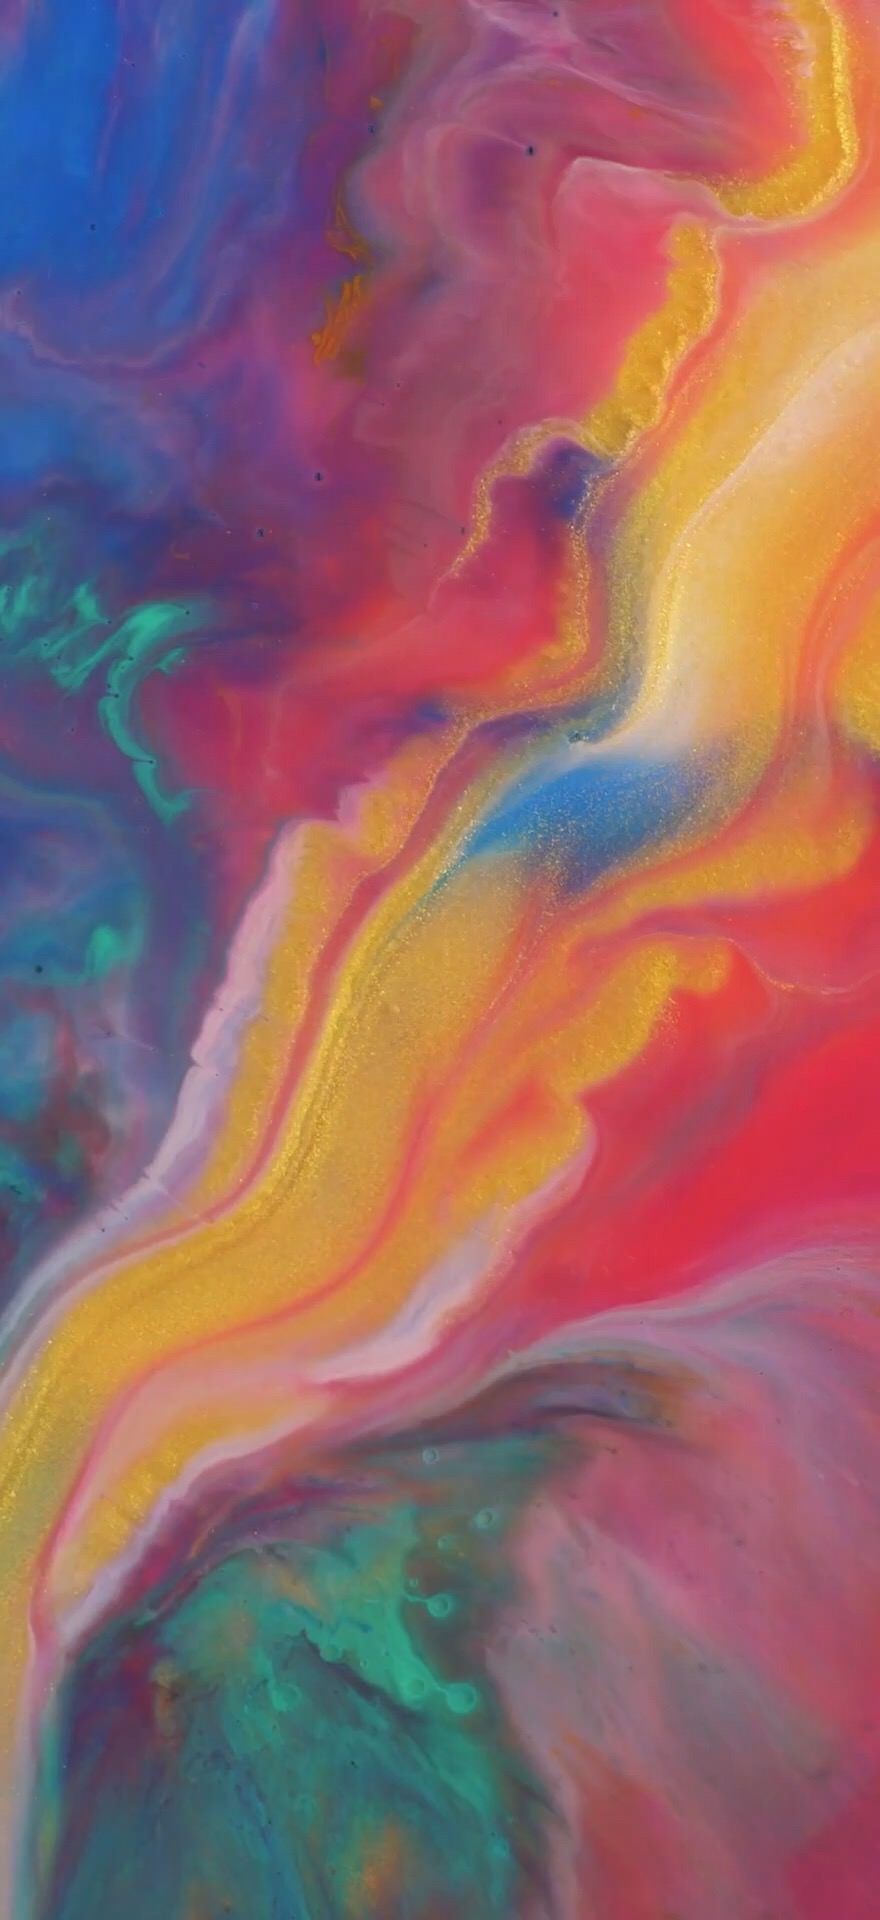 Apple iPhone X Stock Wallpapers on WallpaperDog